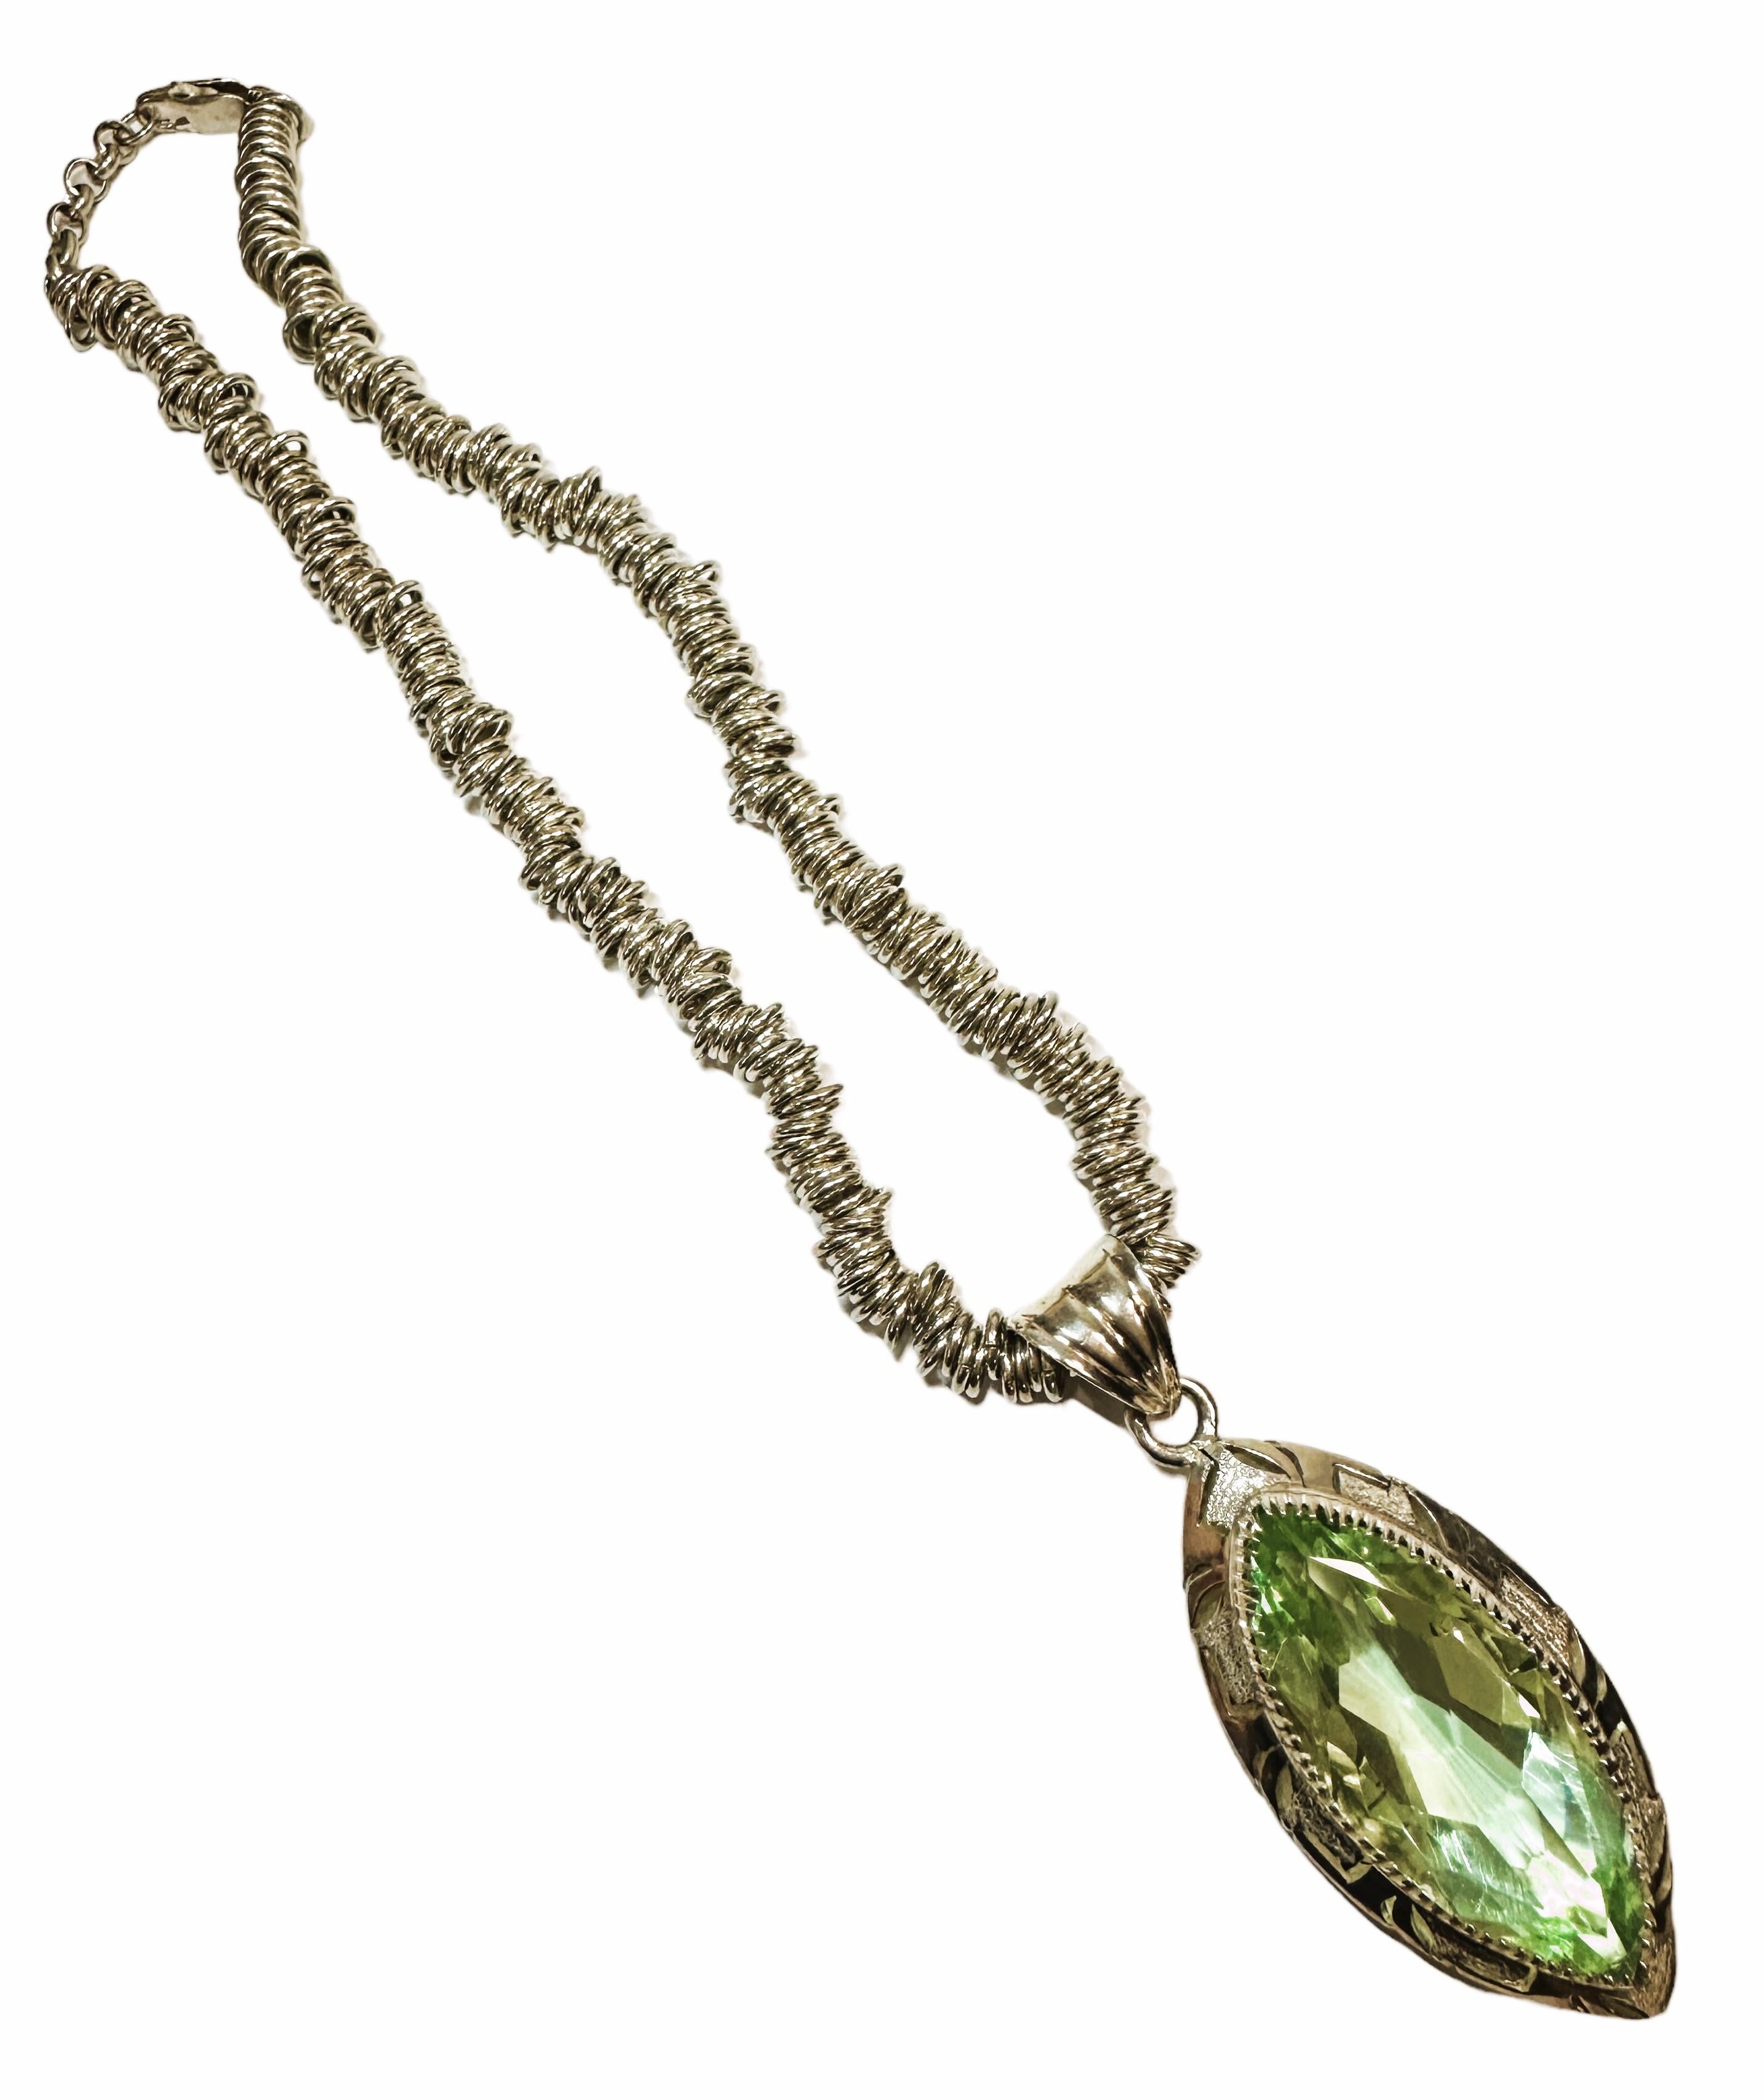 Modernist Handmade 16 Inch Ornate Sterling Silver Pendant Necklace with Green Quartz For Sale